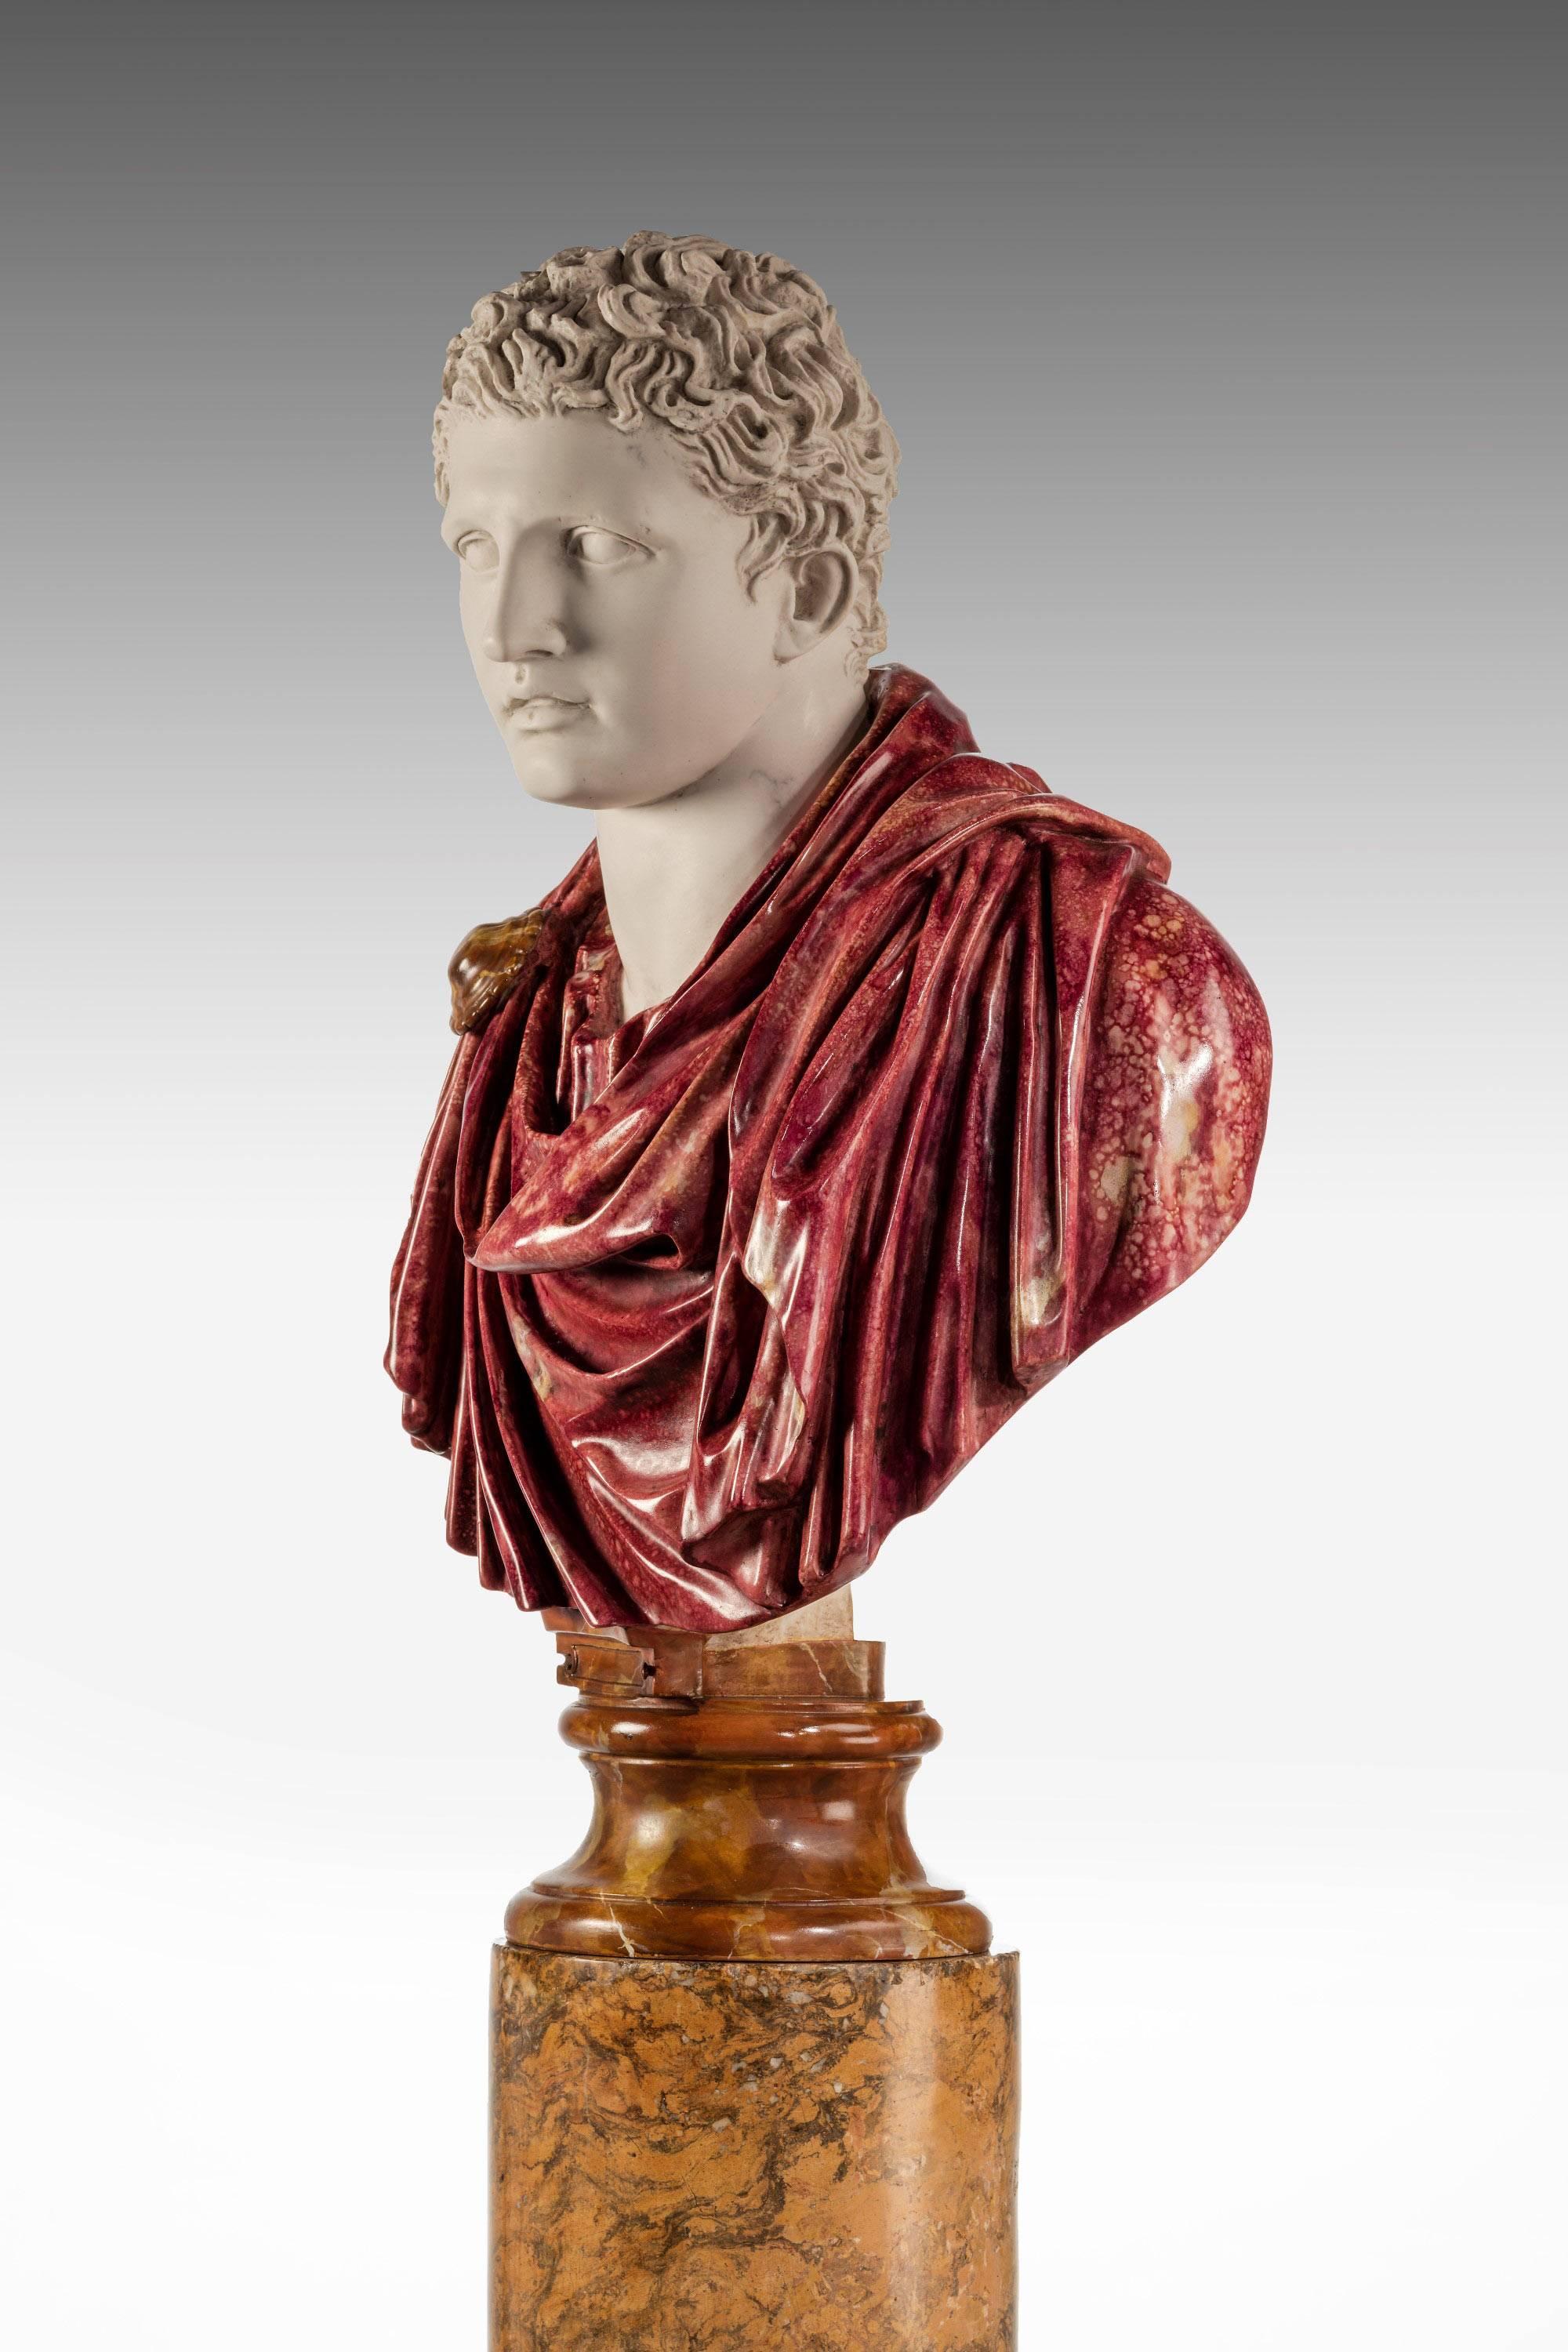 A copy of a Roman Politician Marcus Antonius (83 BC - 30 BC).

Sold without pedestal.

Marcus Antonius January 14, 83 BC – August 1, 30 BC, commonly known in English as Mark or Marc Antony, was a Roman politician and general who played a